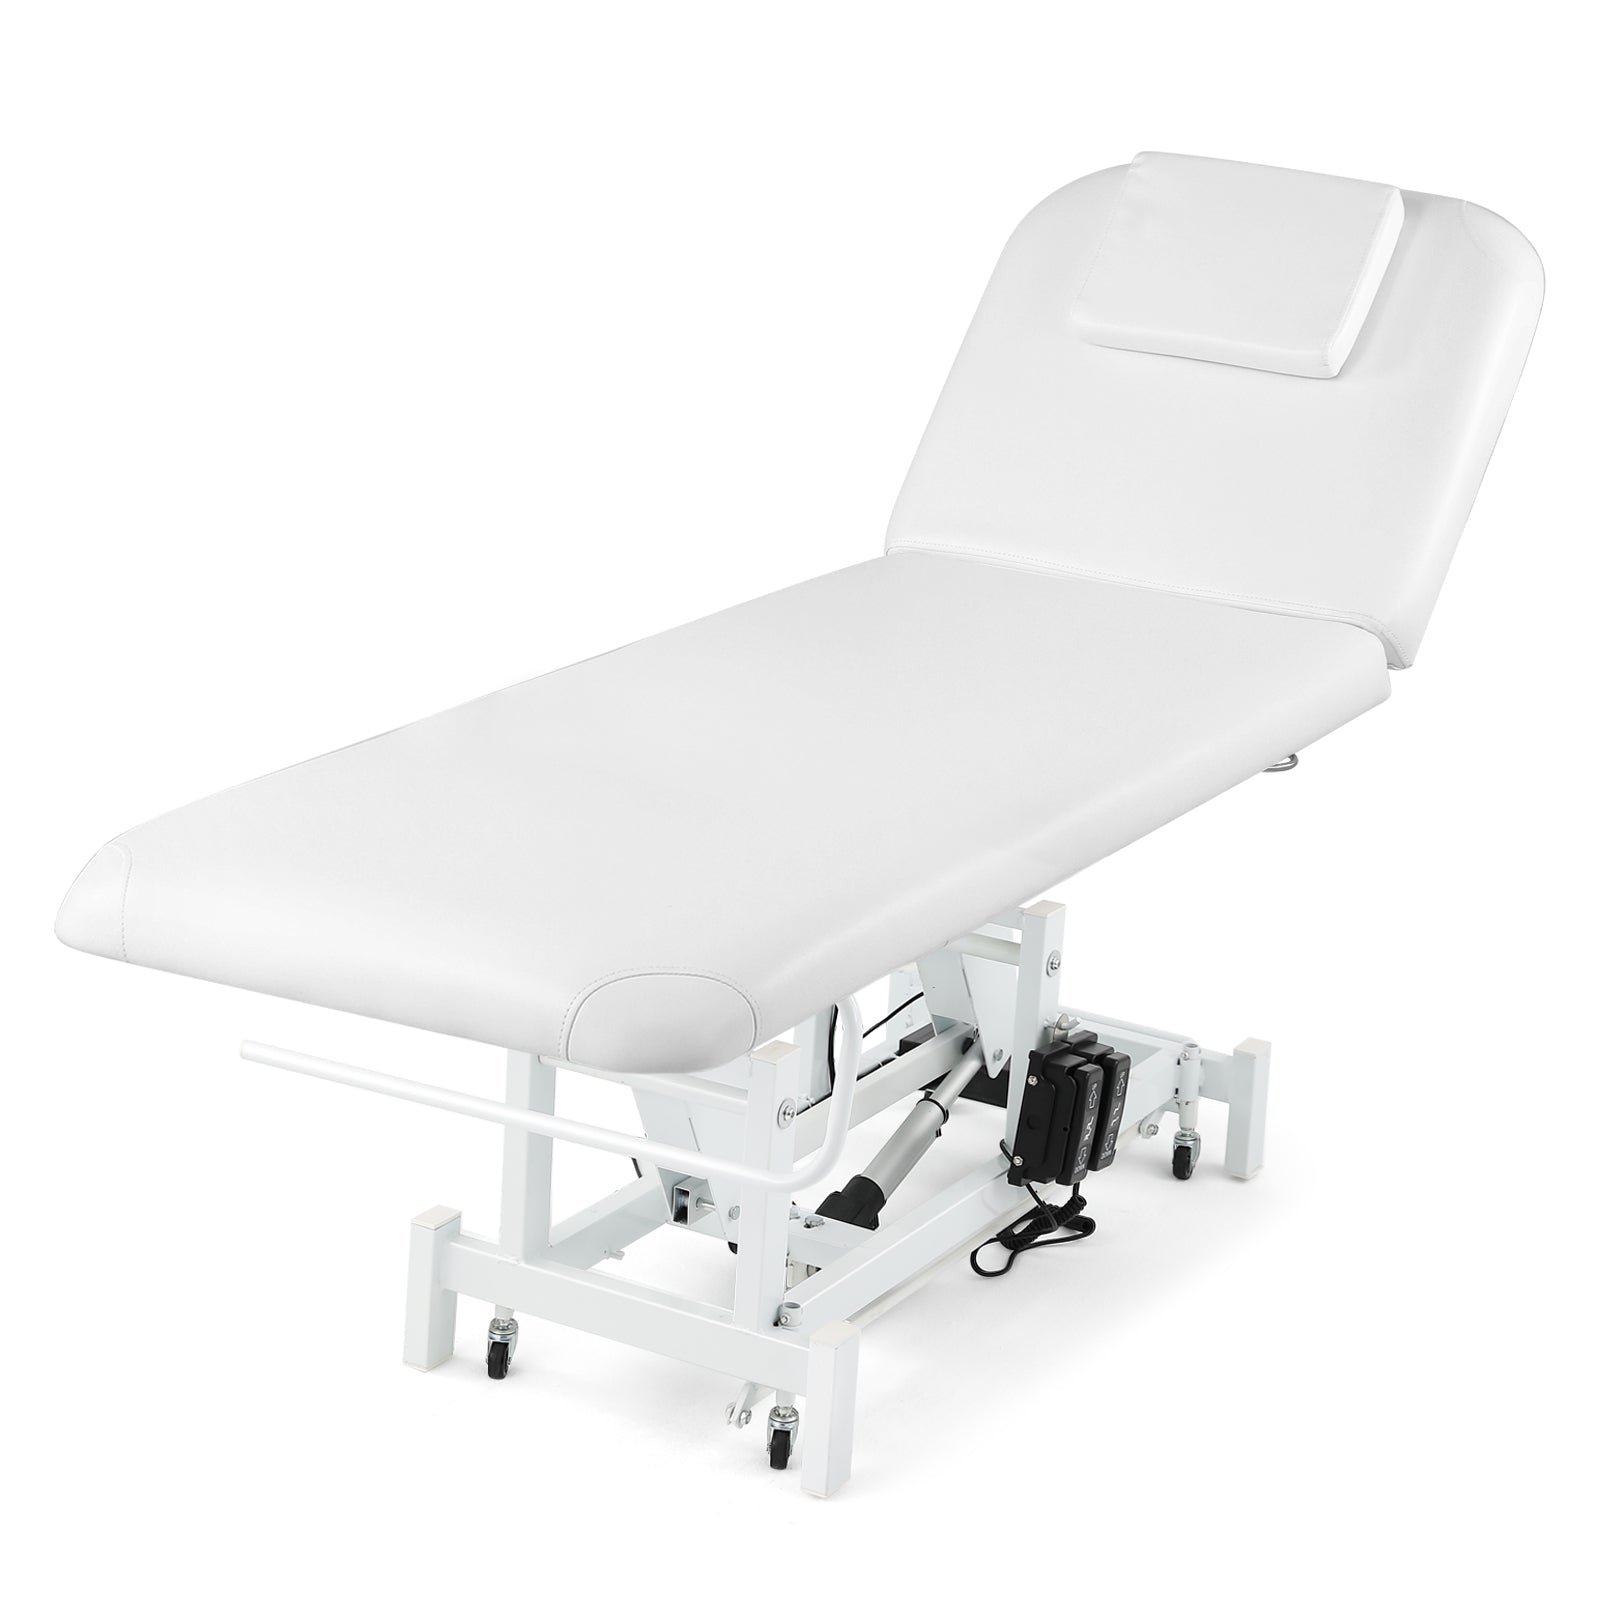 #2010 Electrical Facial Bed for Esthetician 110V Removable Massage Table 2 Motor Beauty Bed Medical Aesthetic Tattoo Chair with Adjustments, Hand/Foot-Operated